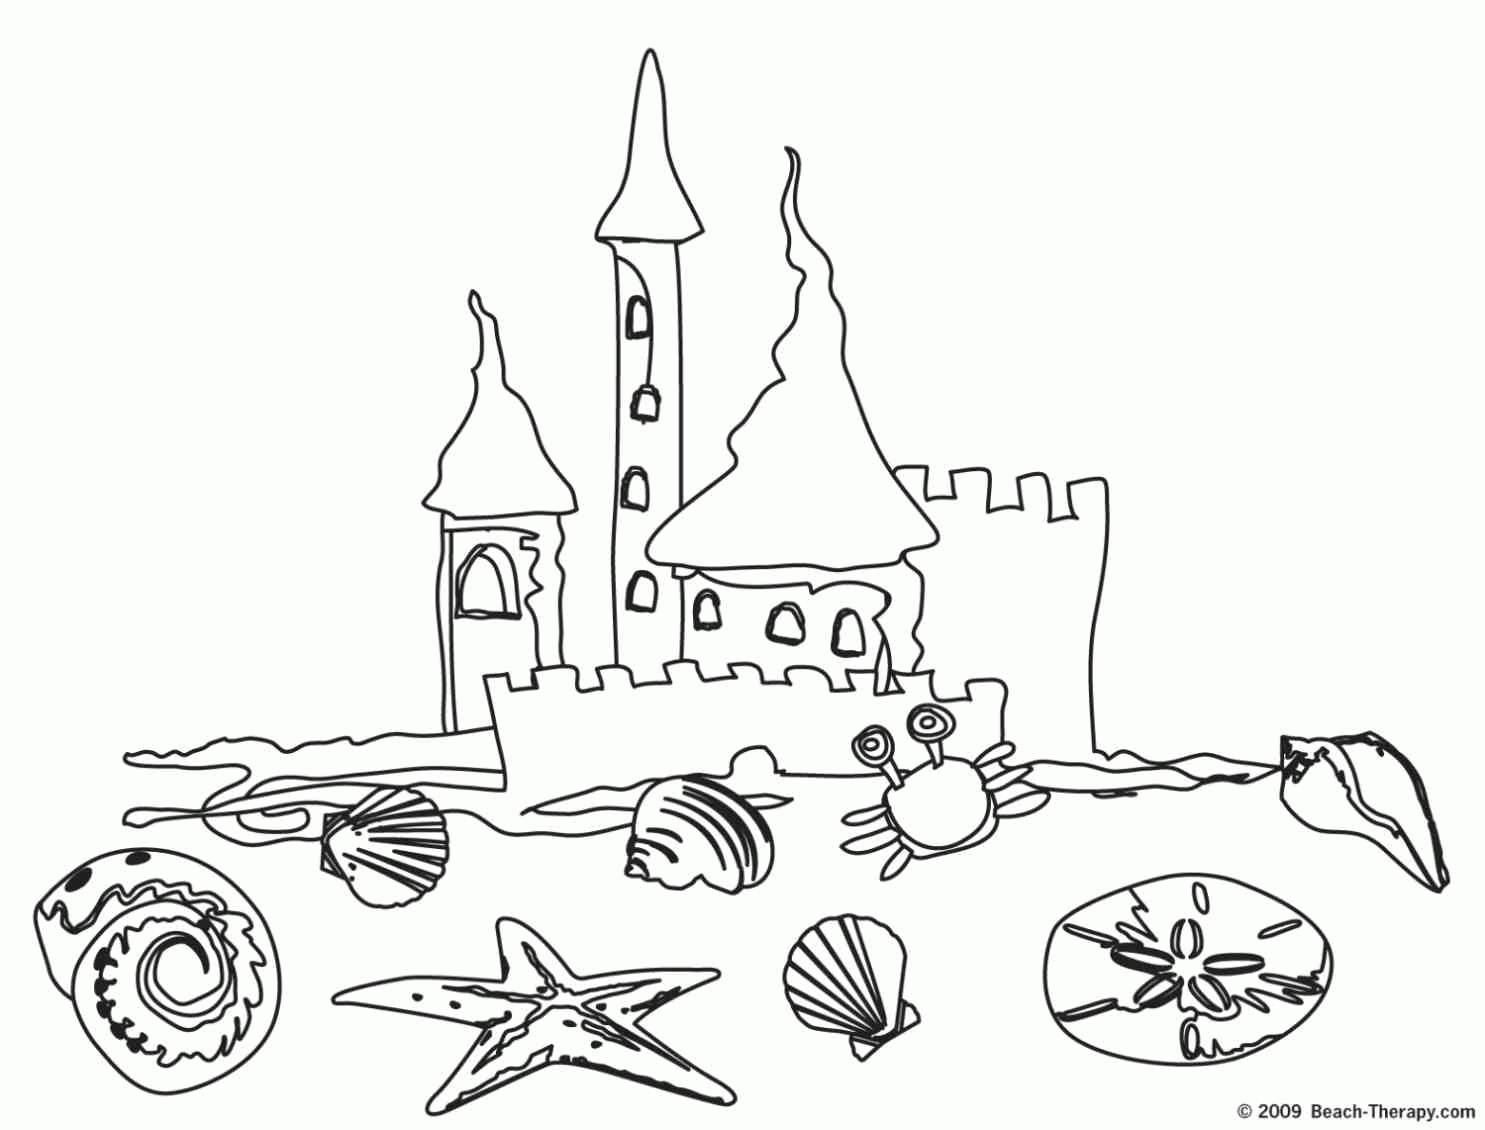 Download Coloring Page Of An Island - Coloring Home